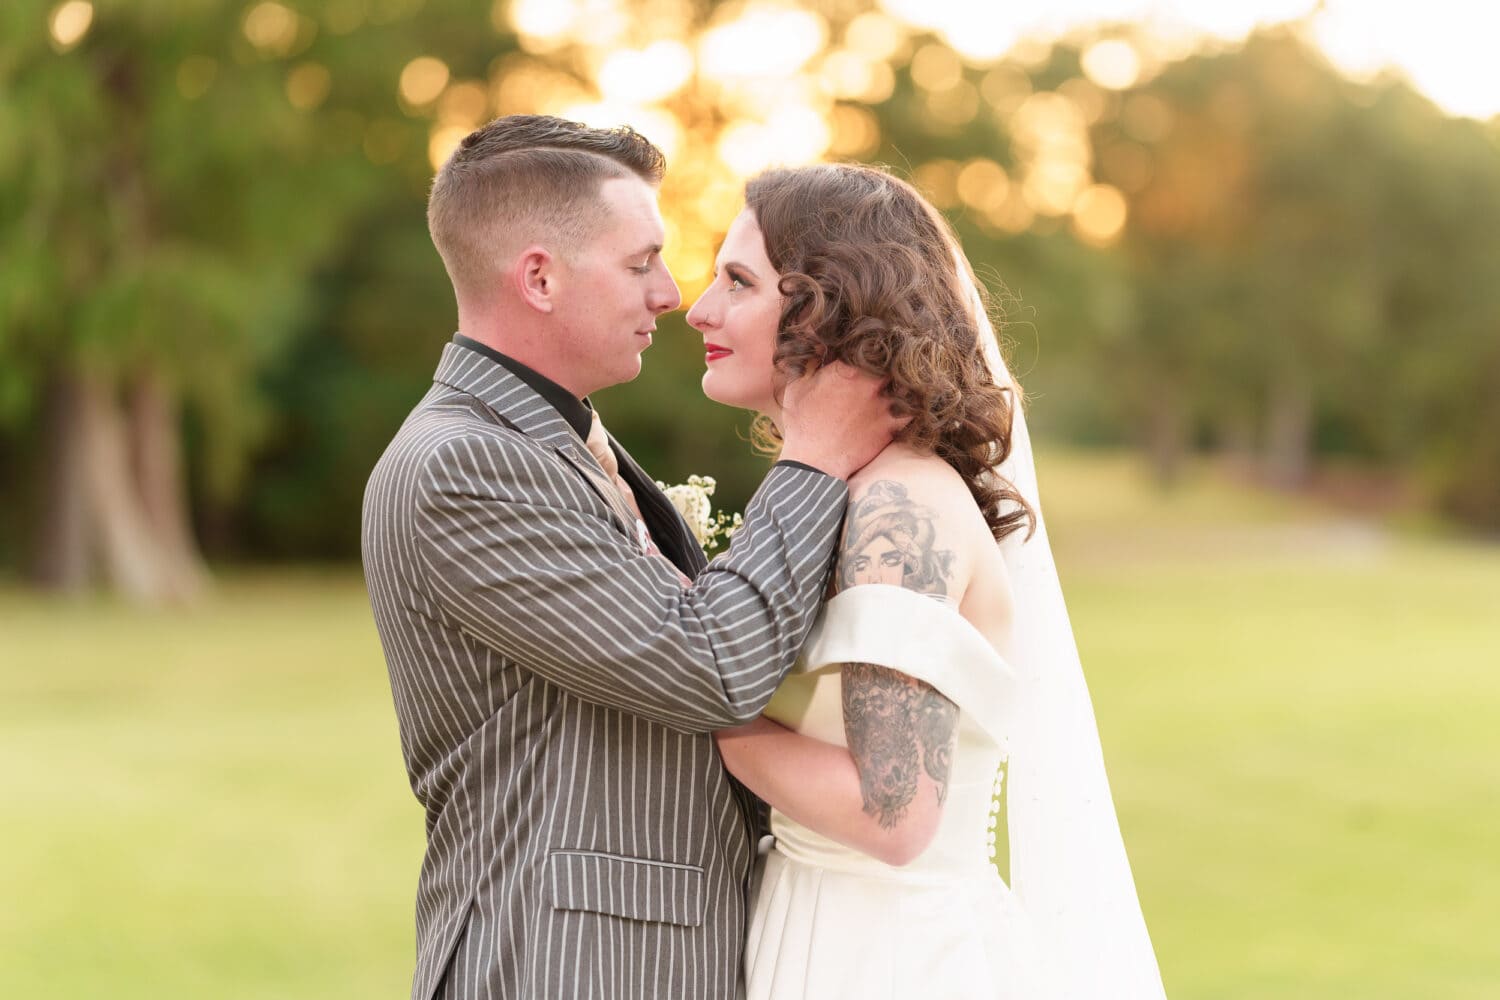 Beautiful bokeh from the sunset behind the bride and groom - Litchfield Country Club